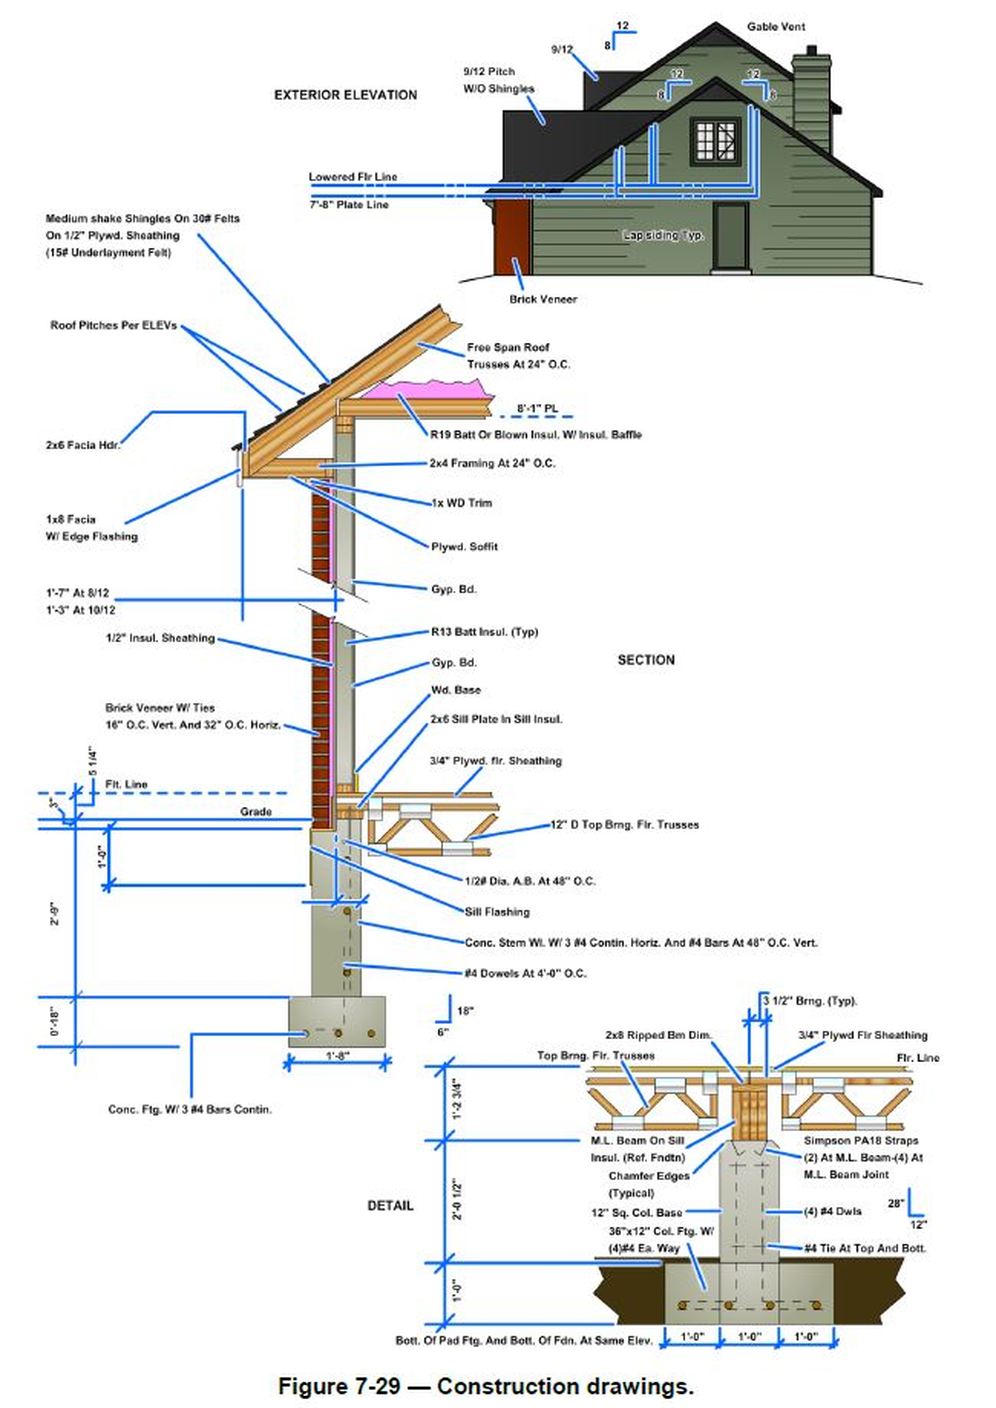 ARCHITECTURAL CONSTRUCTION DRAWINGS